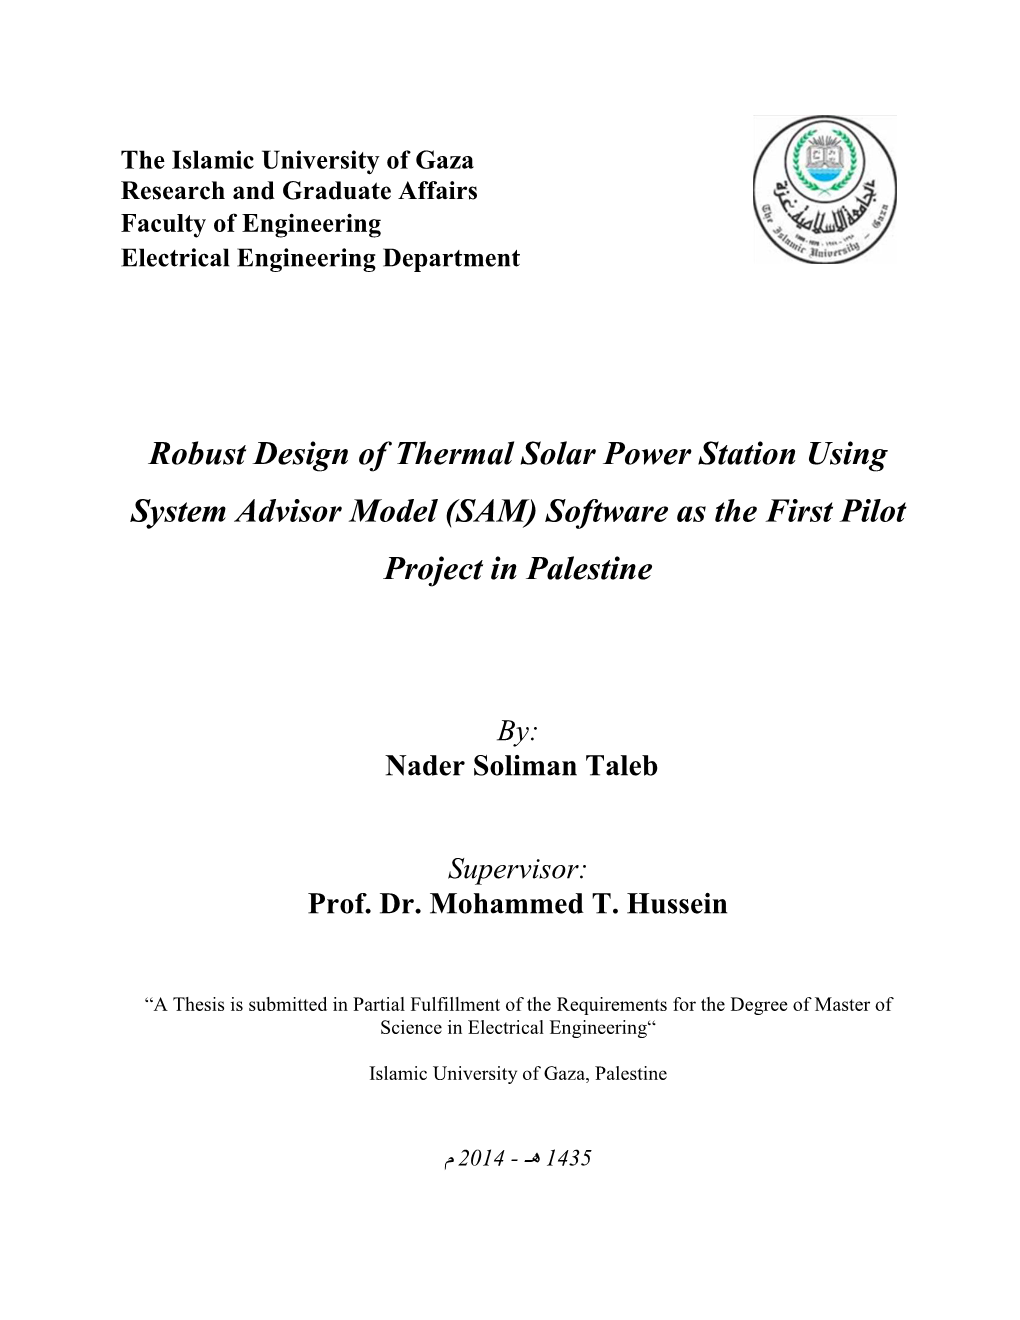 Robust Design of Thermal Solar Power Station Using System Advisor Model (SAM) Software As the First Pilot Project in Palestine